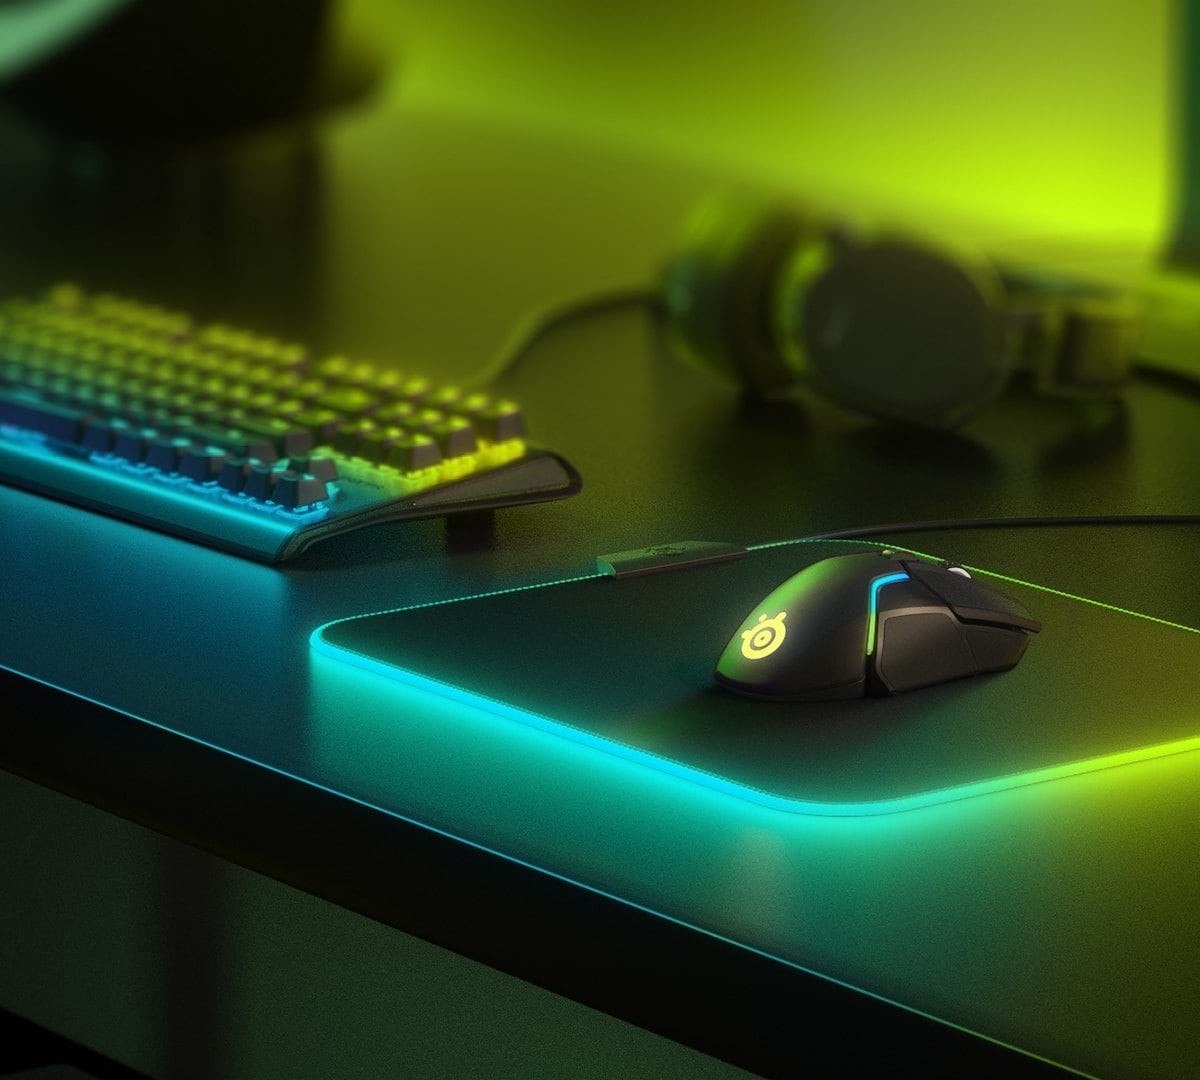 SteelSeries QcK Prism Cloth medium gaming mouse pad offers 16 million color options